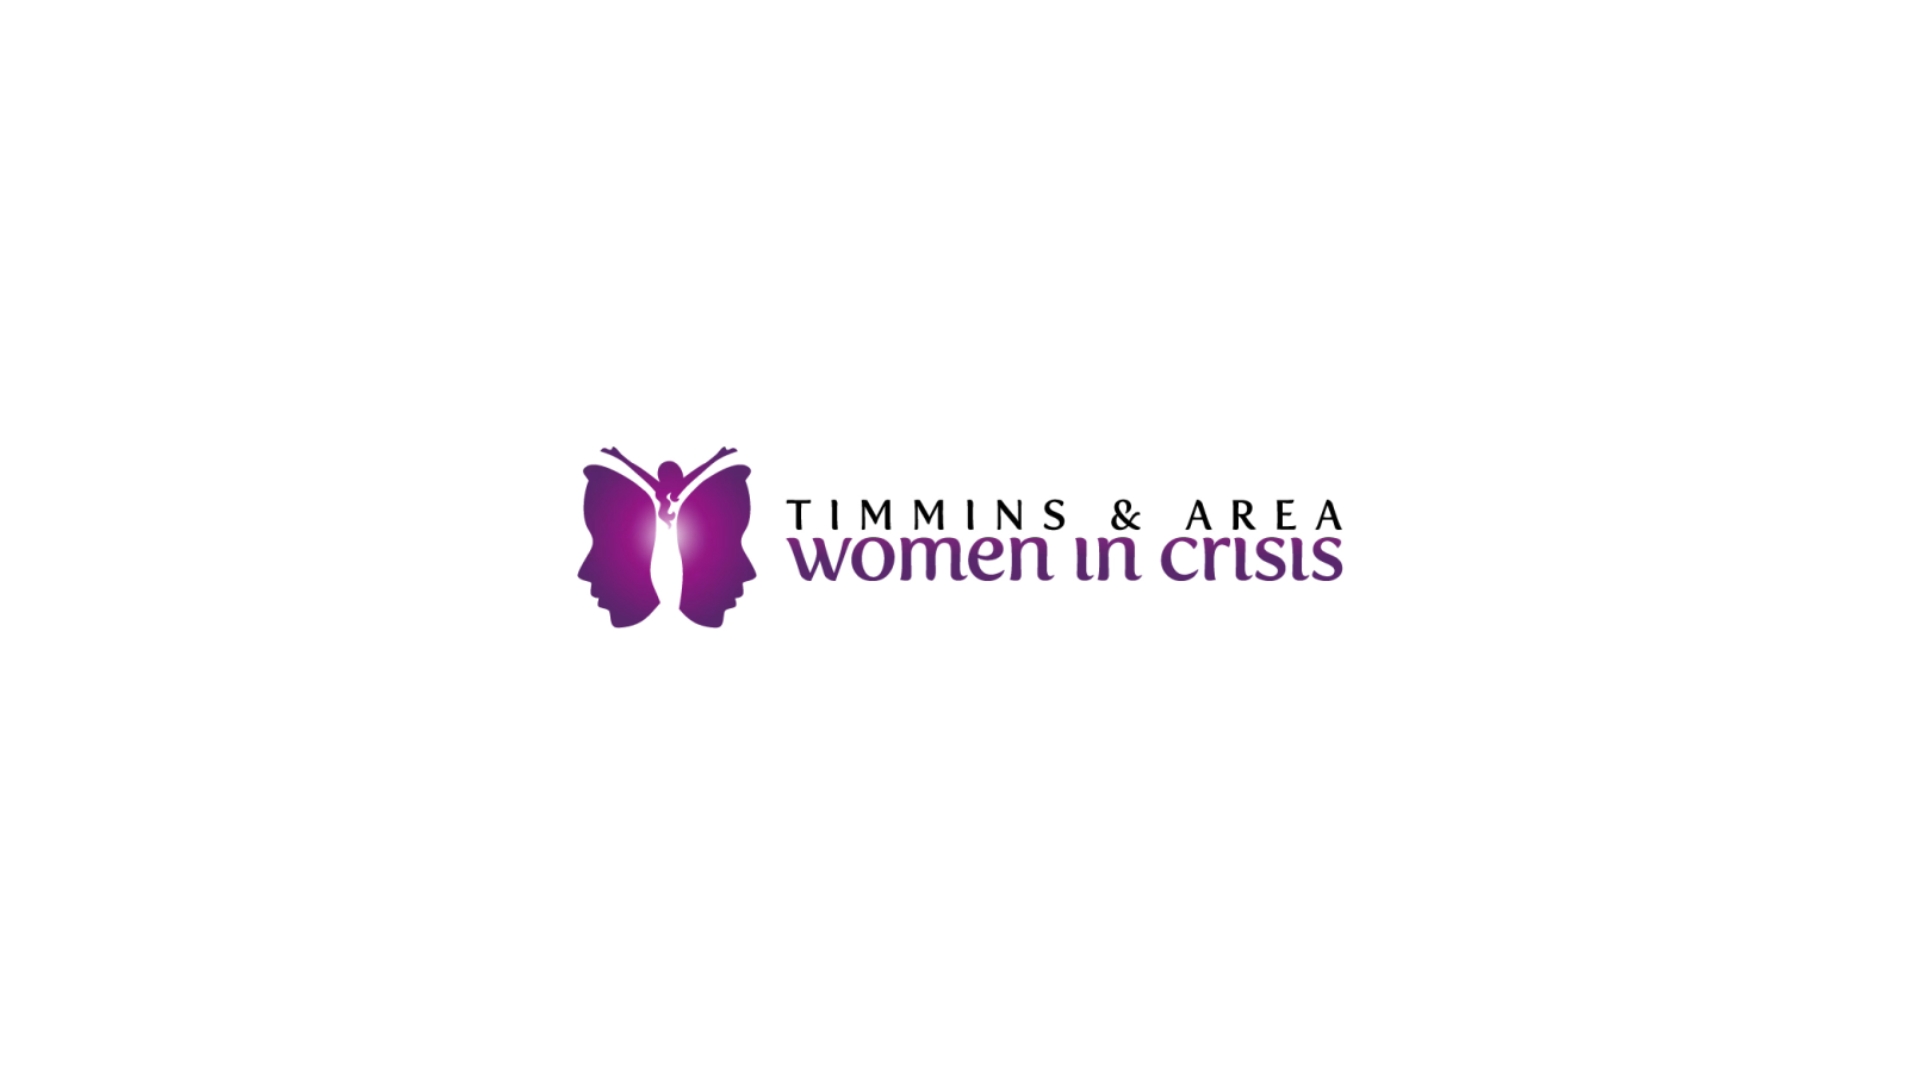 Timmins Care Logo of timmins & area women in crisis, featuring a purple butterfly to the left of the text. Cochrane District Social Services Administration Board